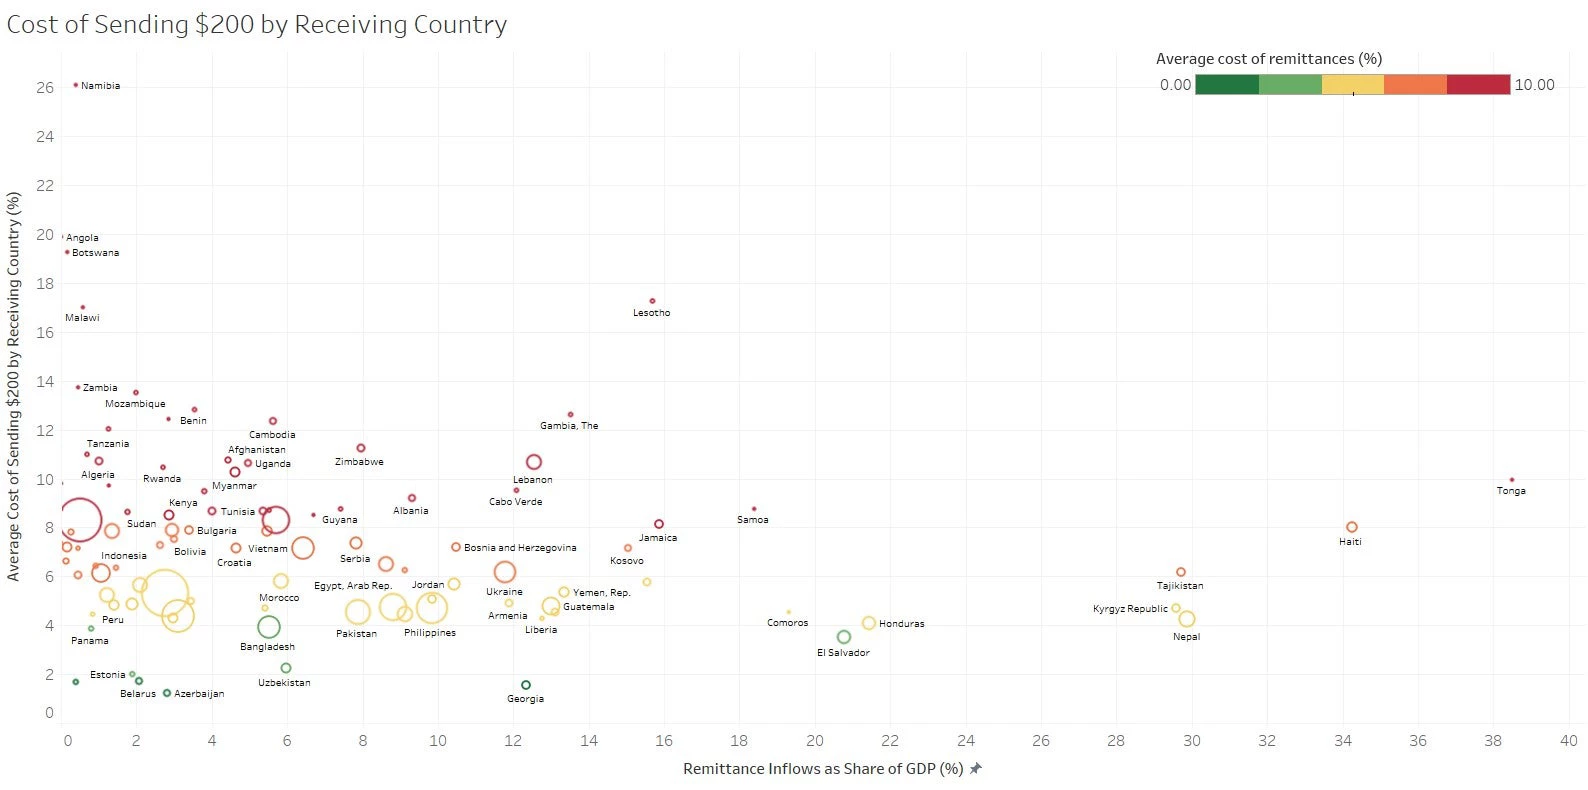 Cost of sending $200, average by receiving countries, Q4 2019, Remittance Prices Worldwide and Remittance Inflows as Share of GDP, World Development Indicators, World Bank